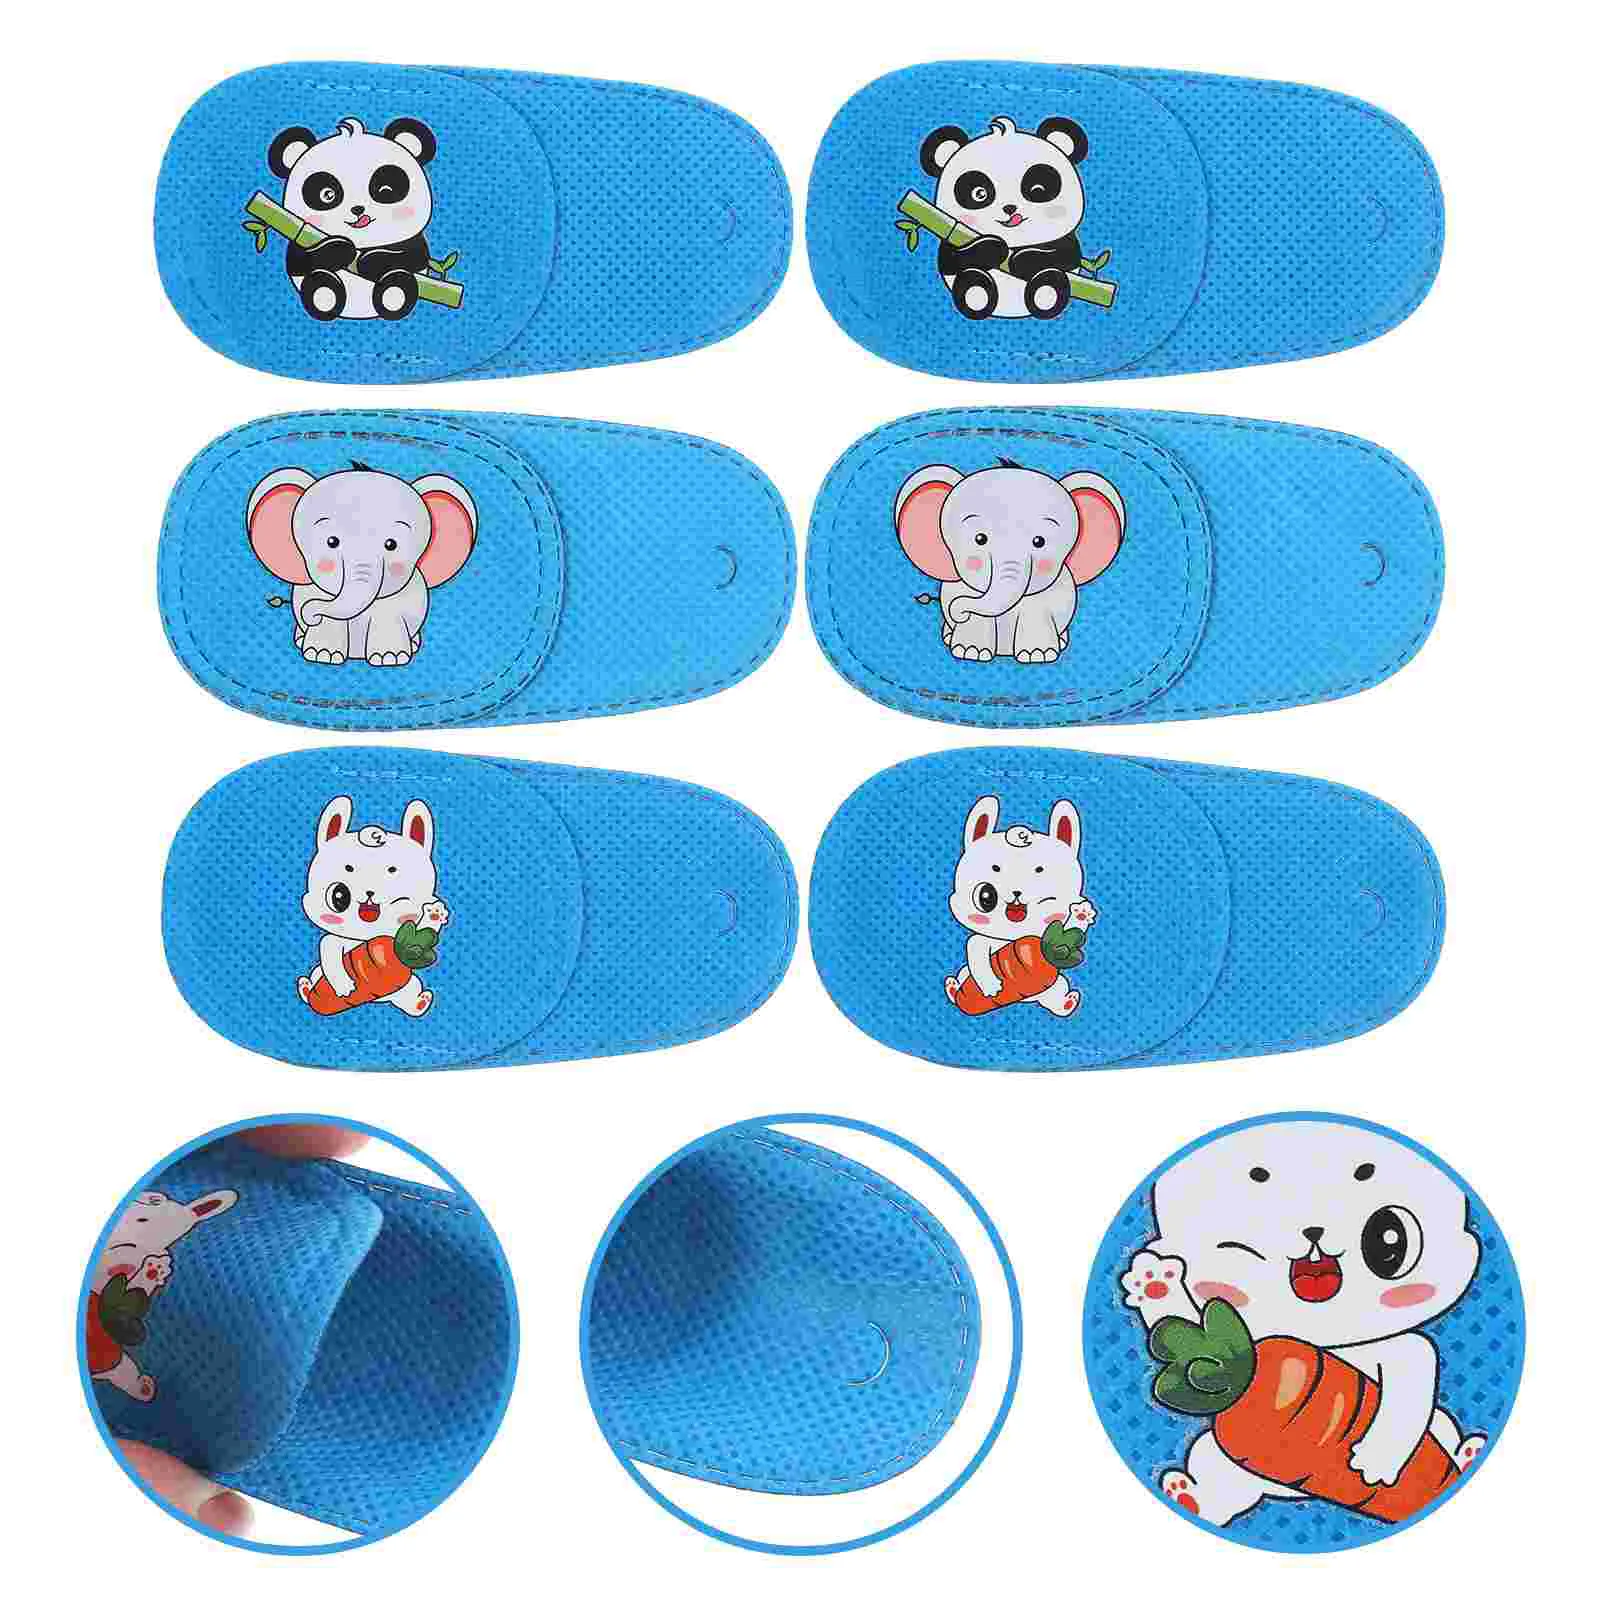 

Eye Patch Patches Kids Lazy Amblyopia Strabismus Mask Patching Toddler Cartoon Eyepatch Left Stickers Adhesive Pad Girls Fabric